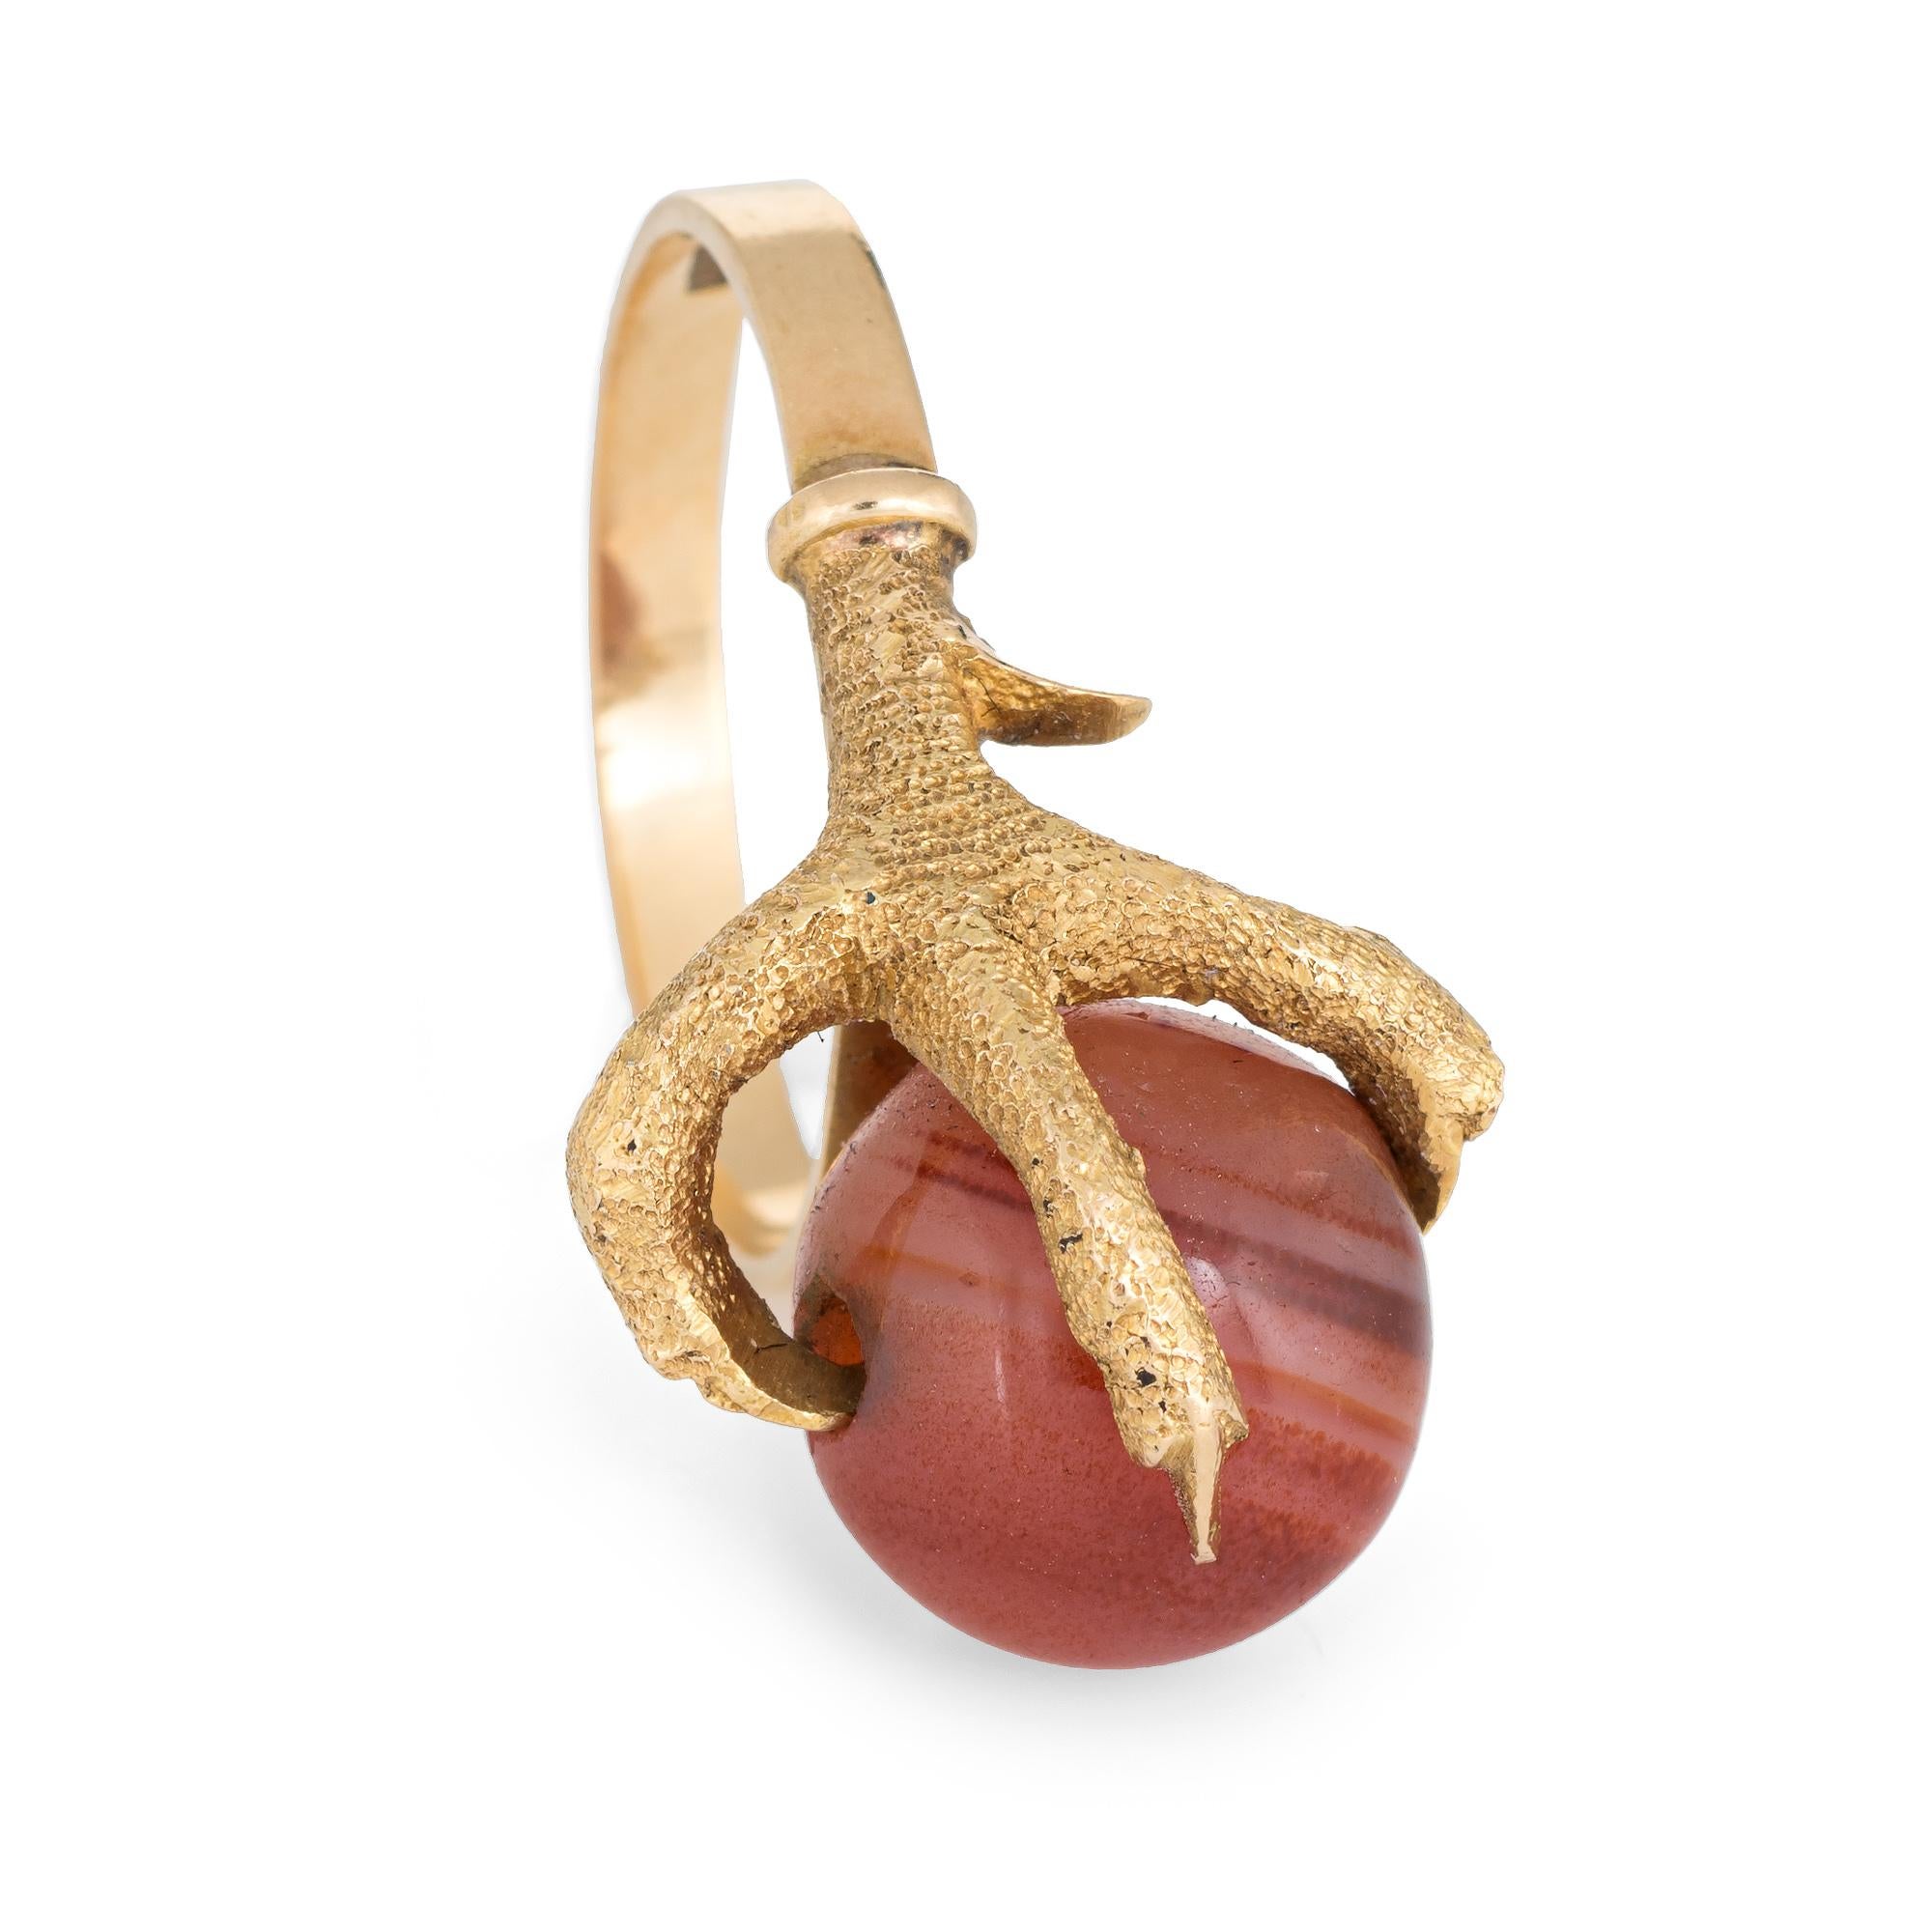 Distinct & stylish vintage dragons claw cocktail ring (circa 1960s to 1970s) crafted in 18 karat yellow gold. 

The agate measures 10mm and is in excellent condition (free of cracks or chips). The agate is movable in the claw setting. 

The dragons